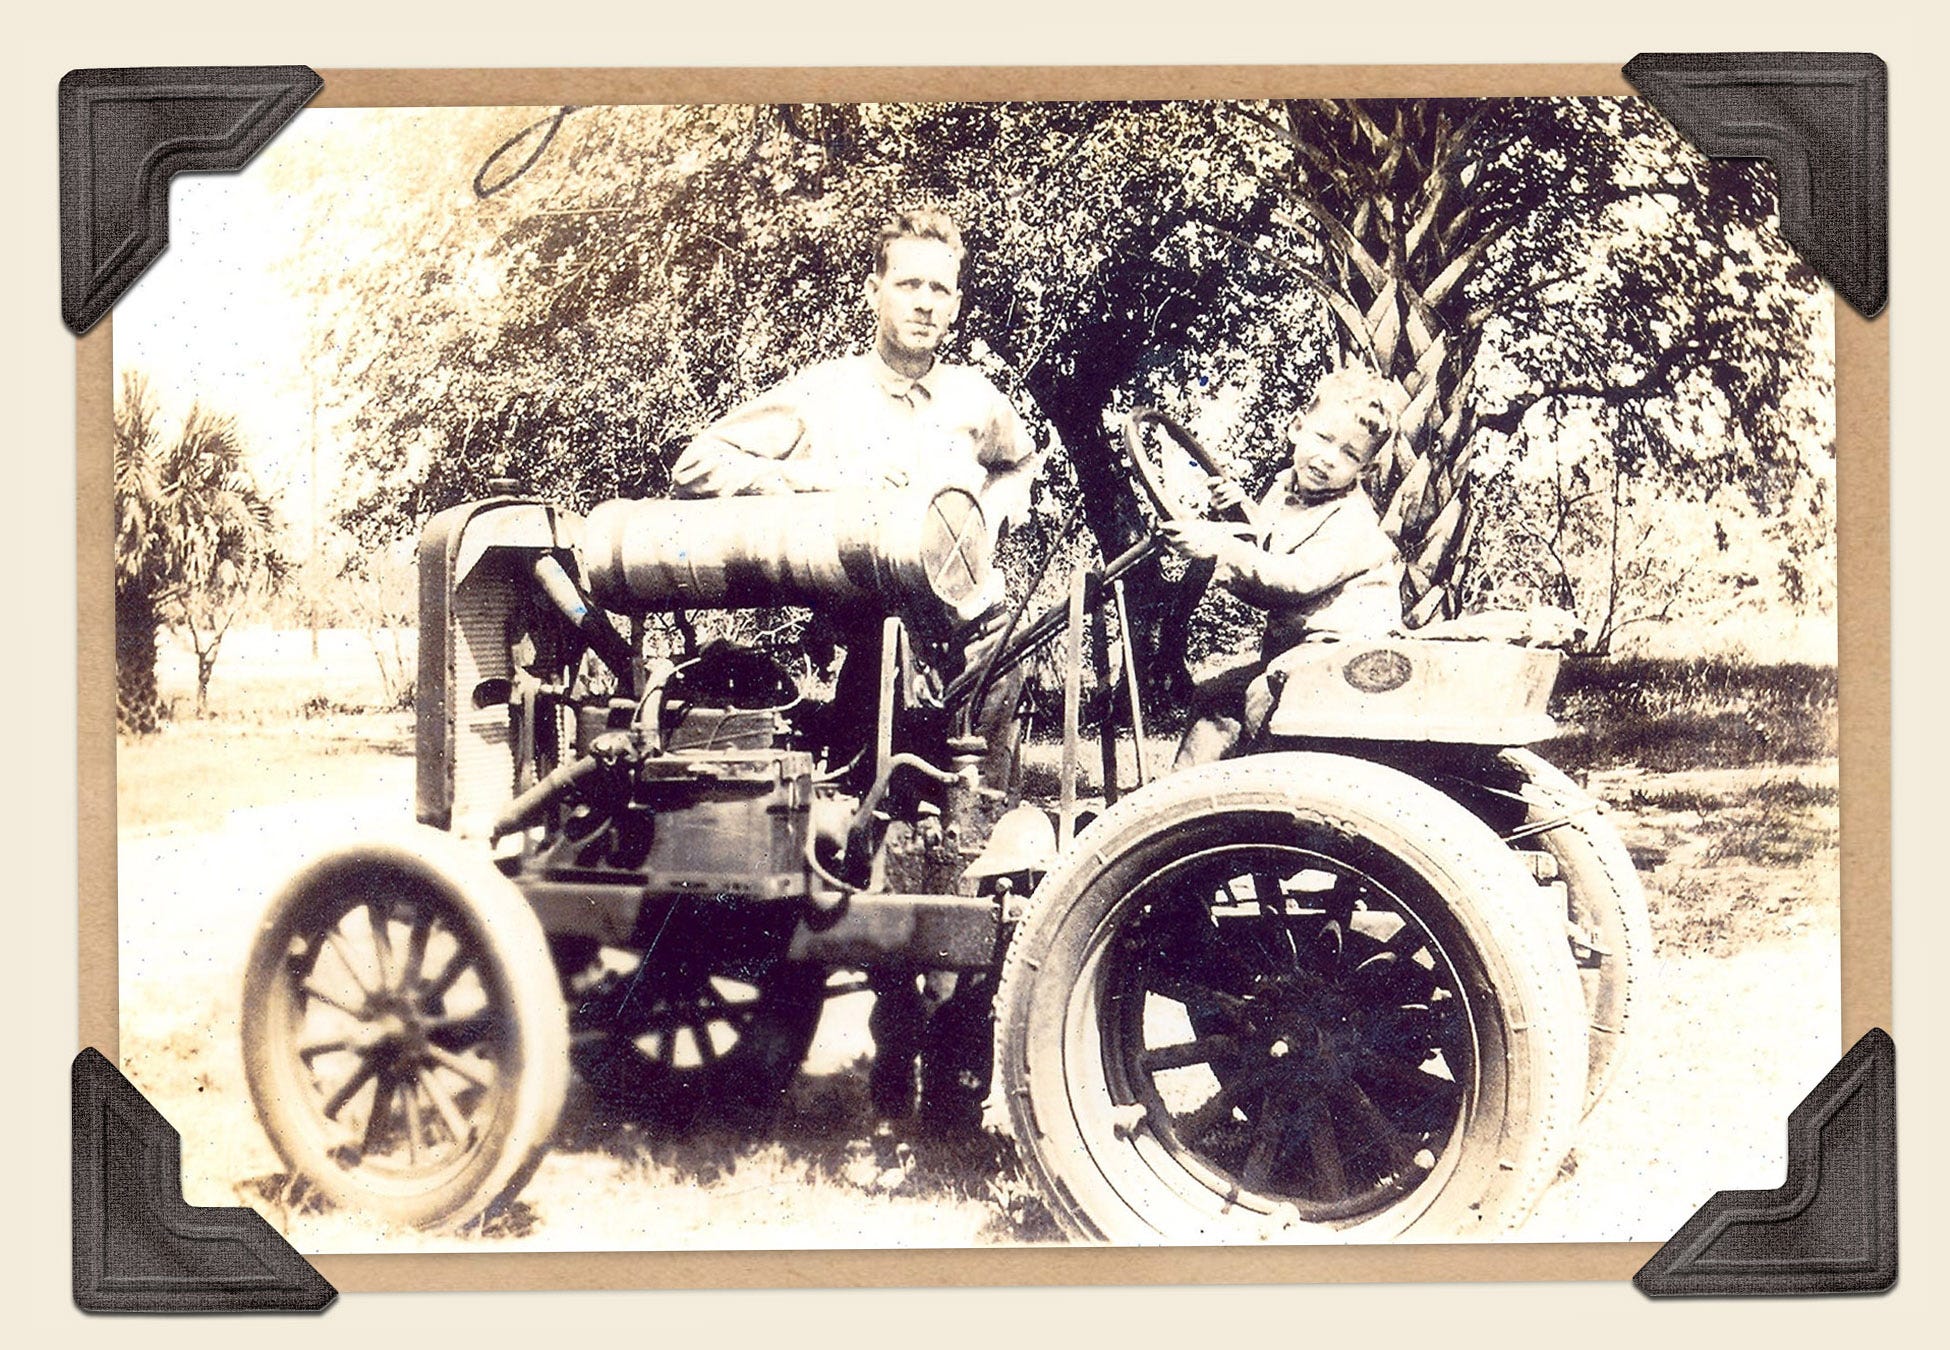 Arthur Dunn, who moved to Florida from Georgia and became a prominent businessman and county commissioner in Brevard County, is pictured with his son, Lewis Taylor Dunn, who sits on a handmade tractor.